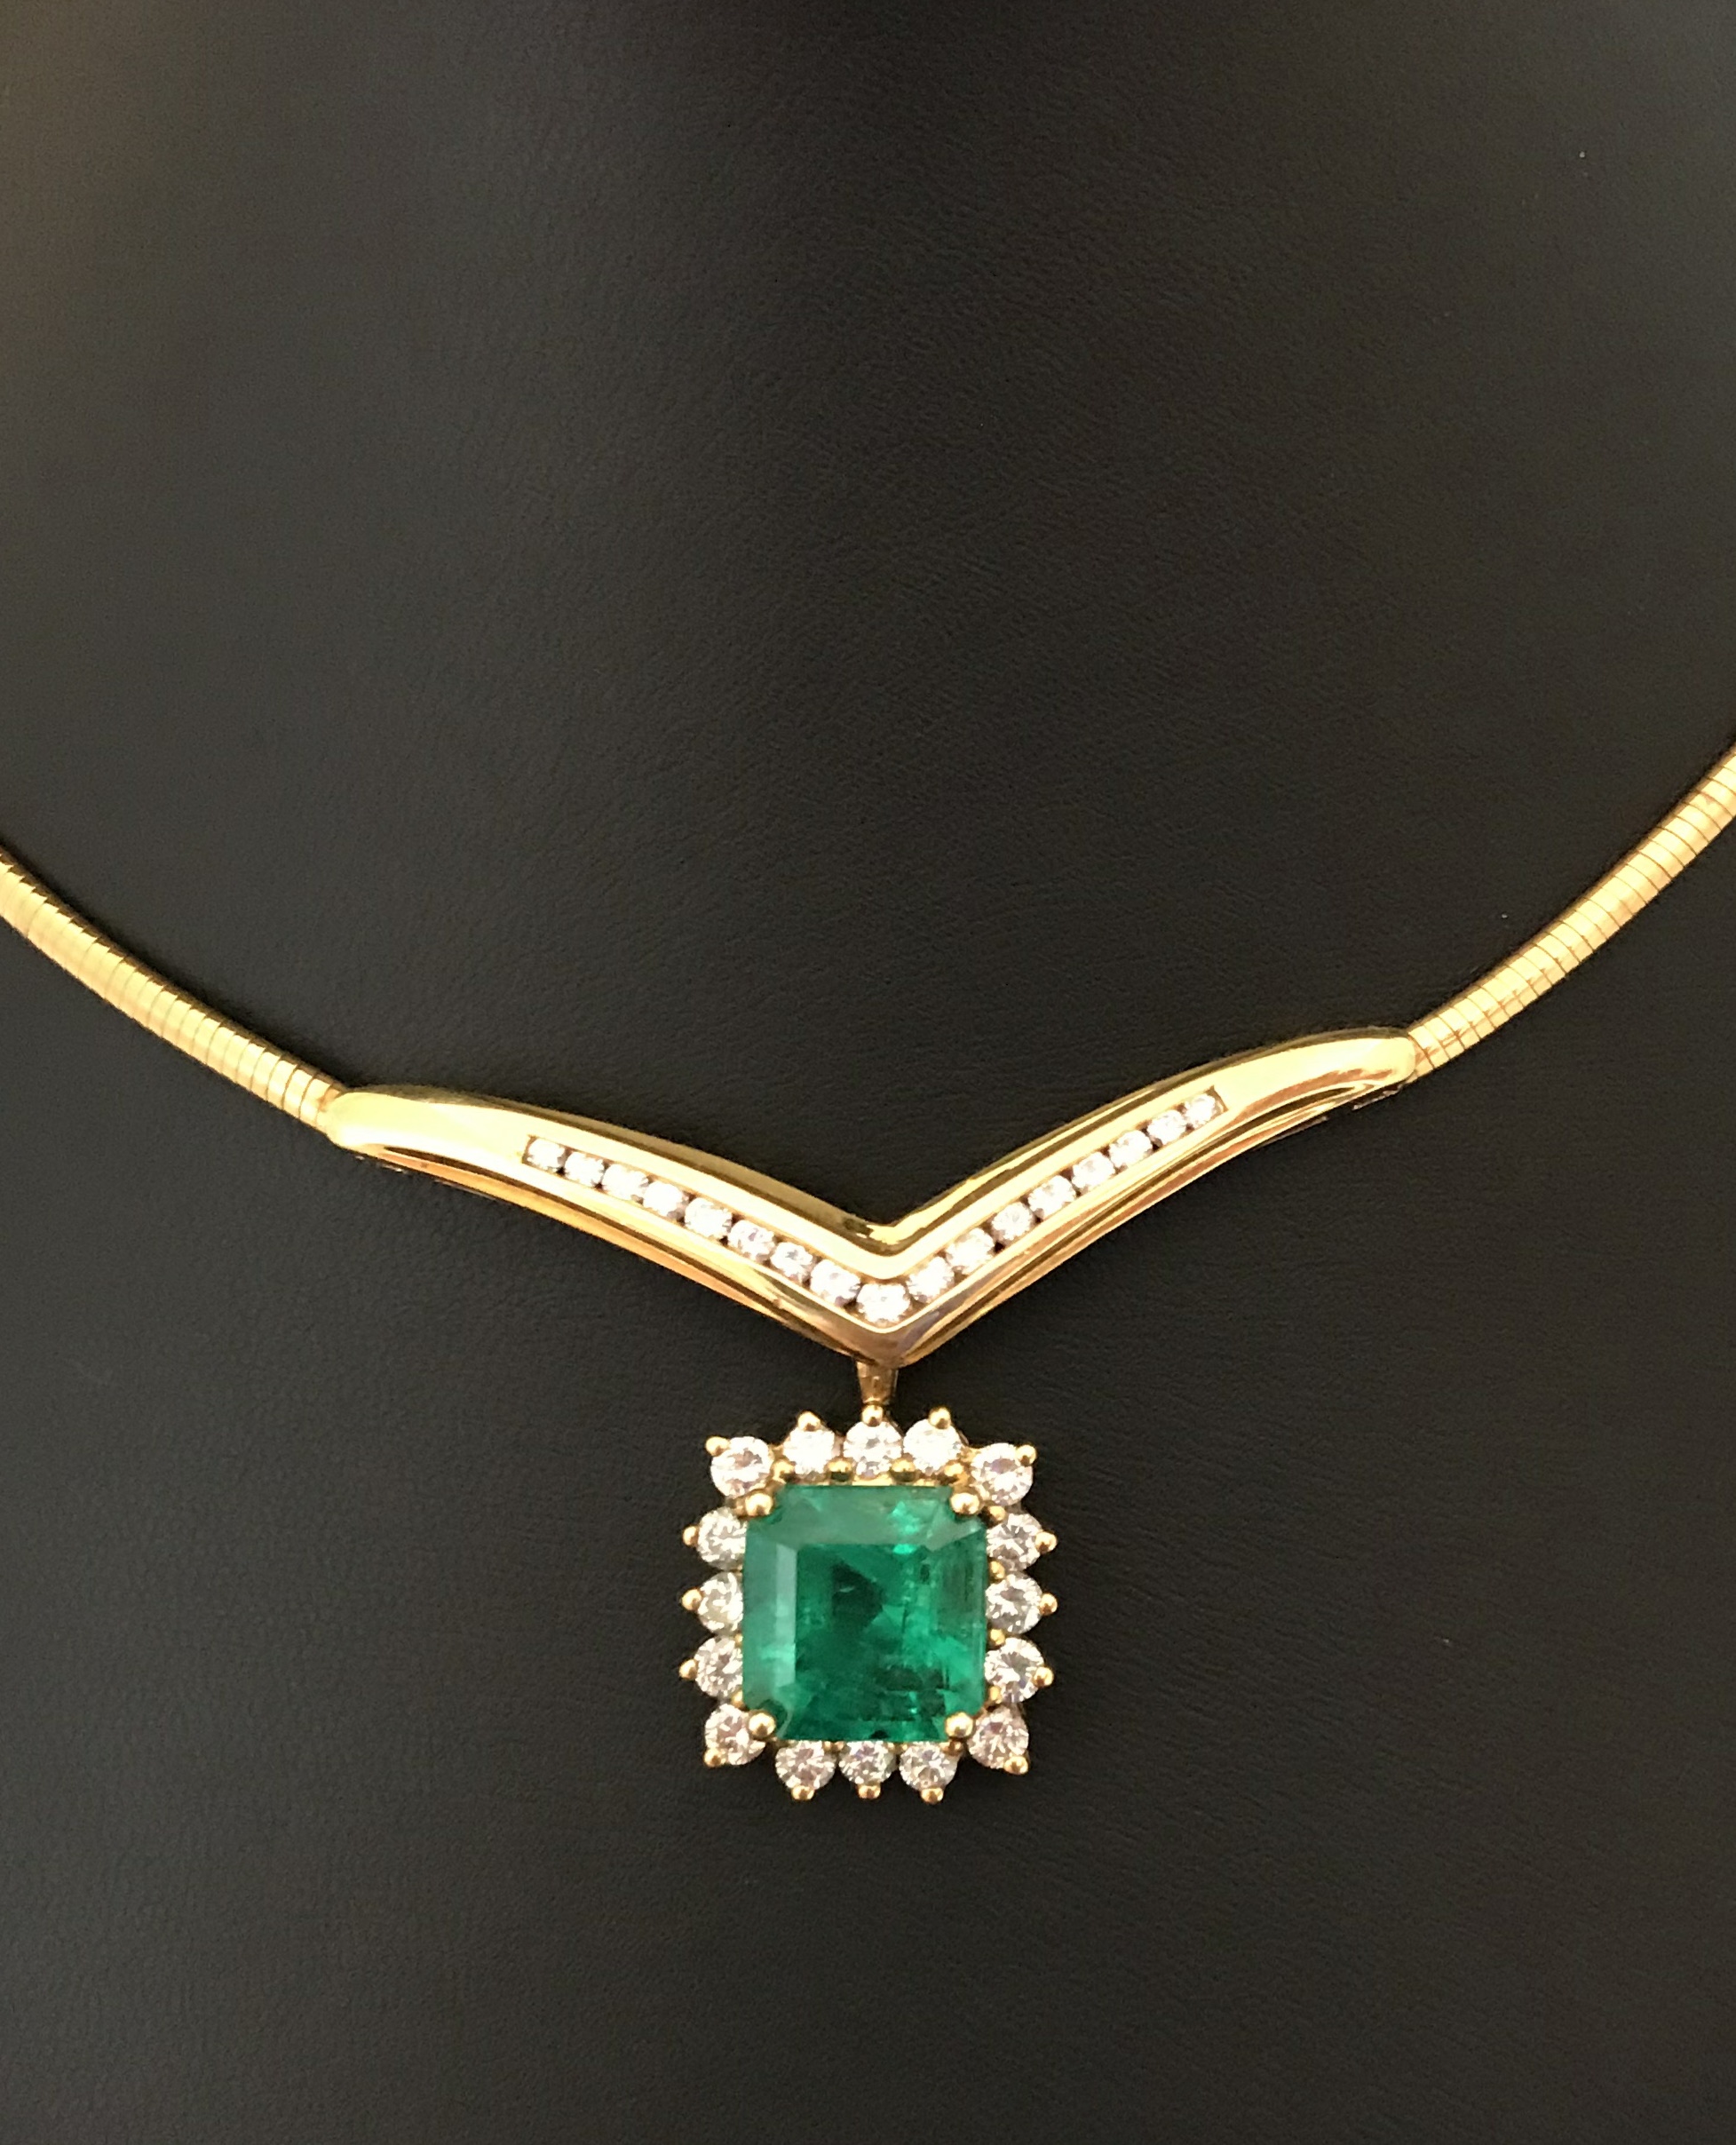 A fine emerald and diamond cluster drop pendant set in 18ct yellow gold attached to a herringbone - Image 4 of 5